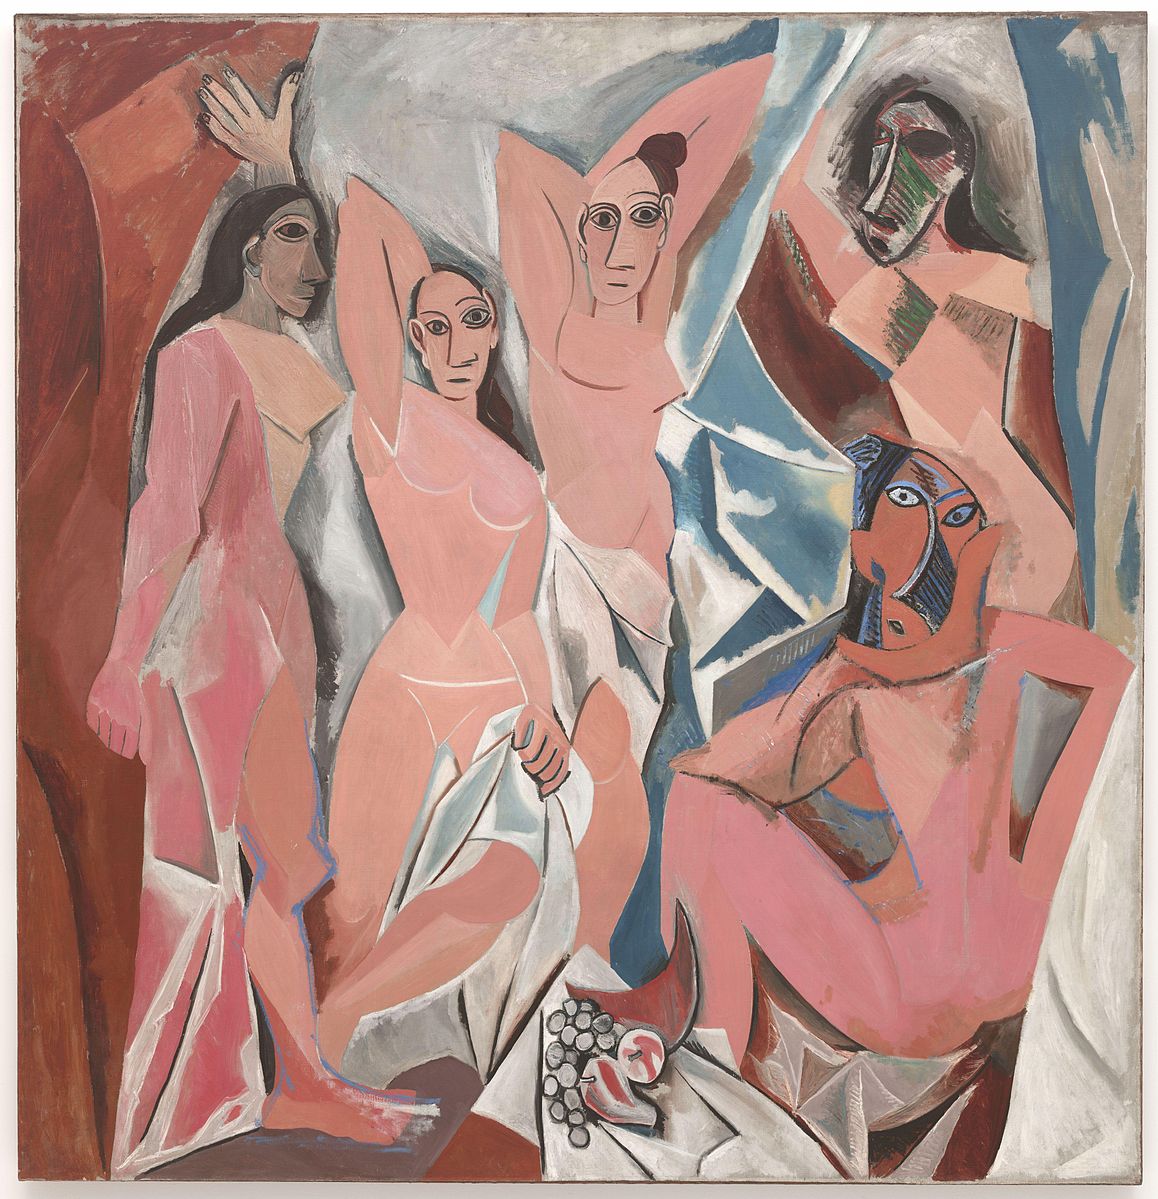 Five nude women standing or sitting with blues, peaches and white colors